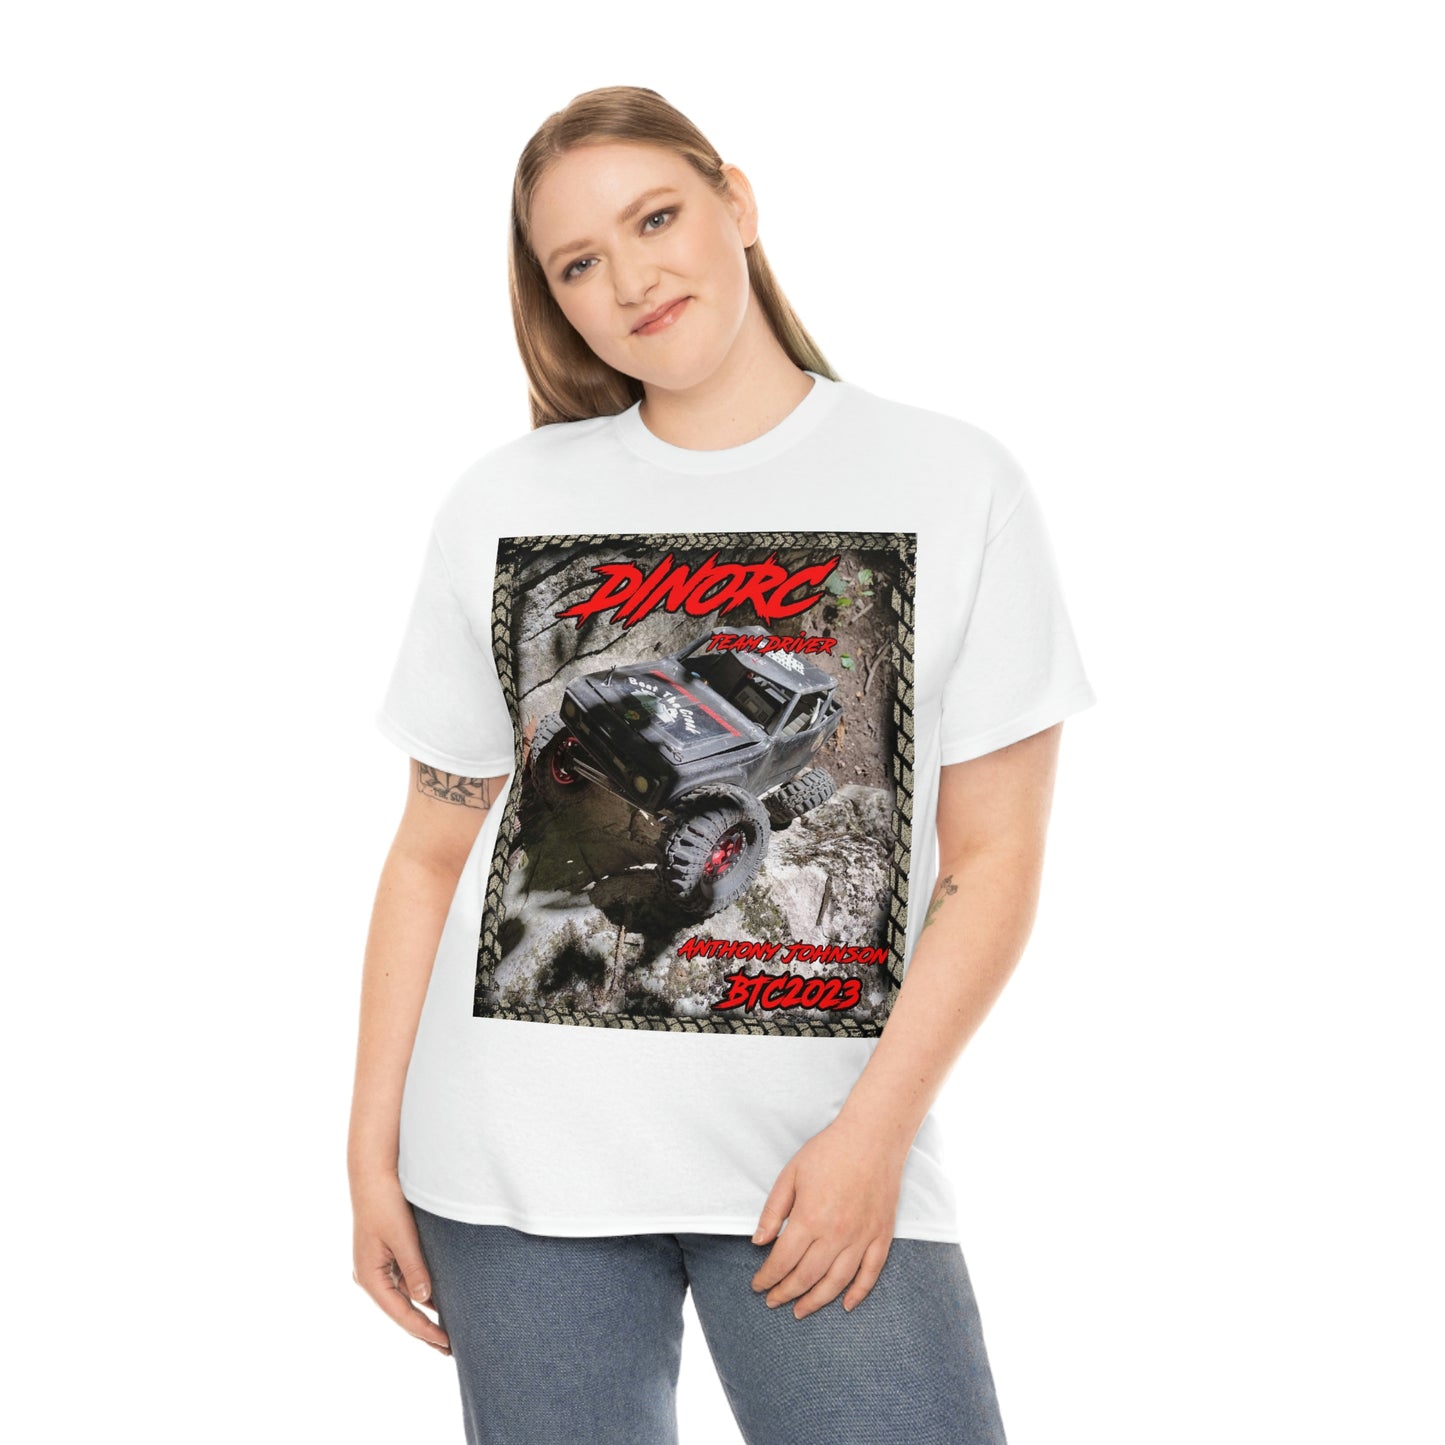 Anthony Johnson T rex  DinoRC Team Driver truck logo Front and Back DinoRc Logo T-Shirt S-5x 5 colors